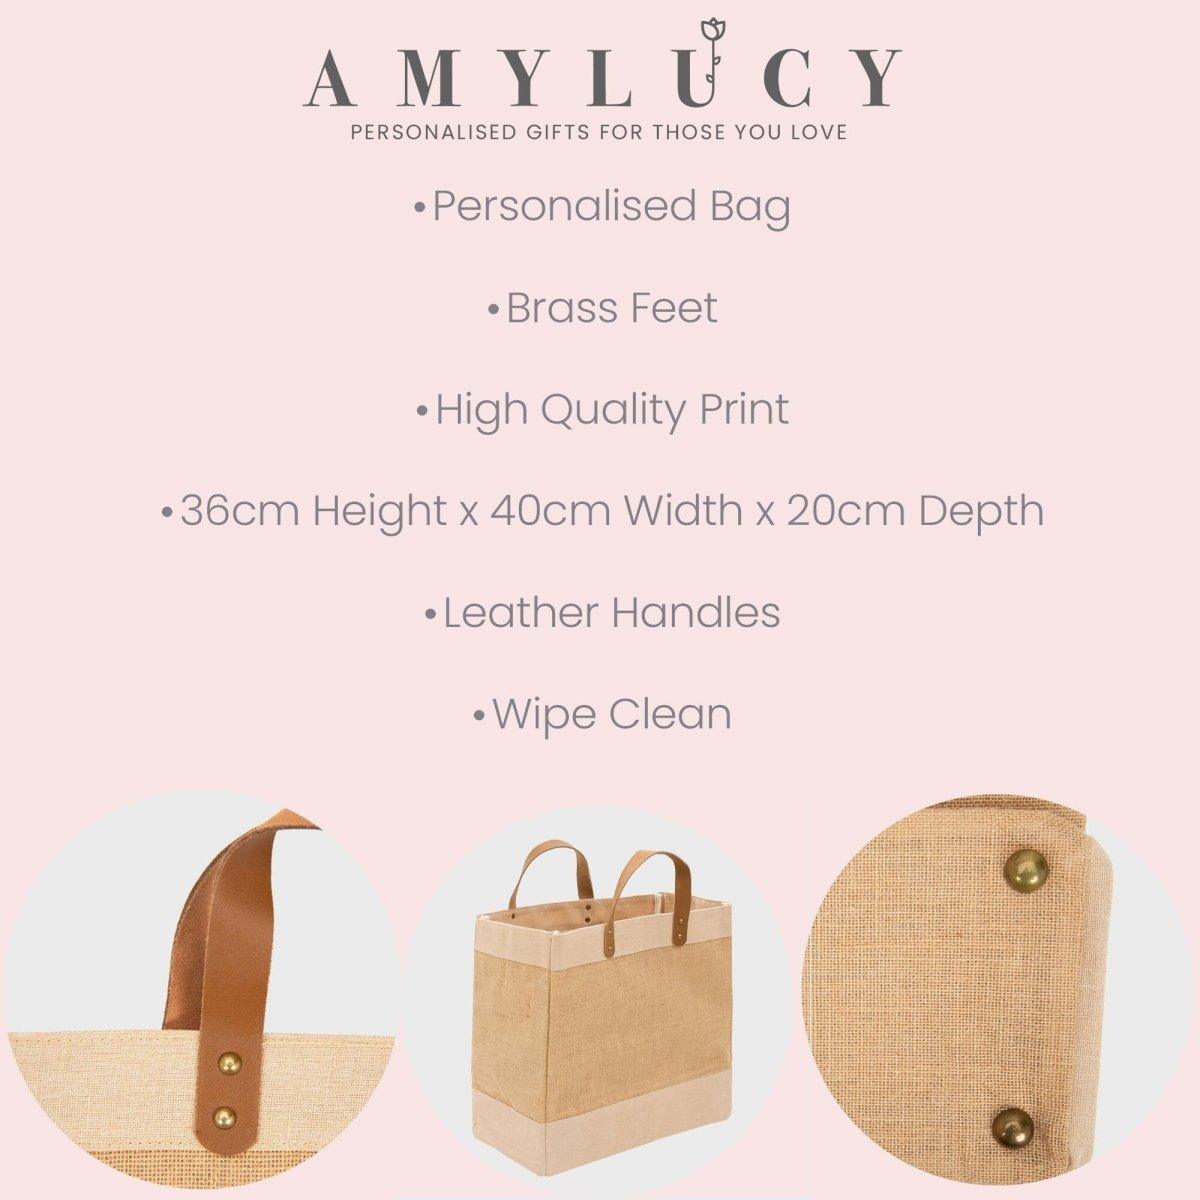 Personalised Monogram Bag, Ladies Shopping Bag, Fashion Initial Bags, Luxury Bridal Gifts, Jute Bag, Farmers Market, Natural, Eco Bags, Name - Amy Lucy